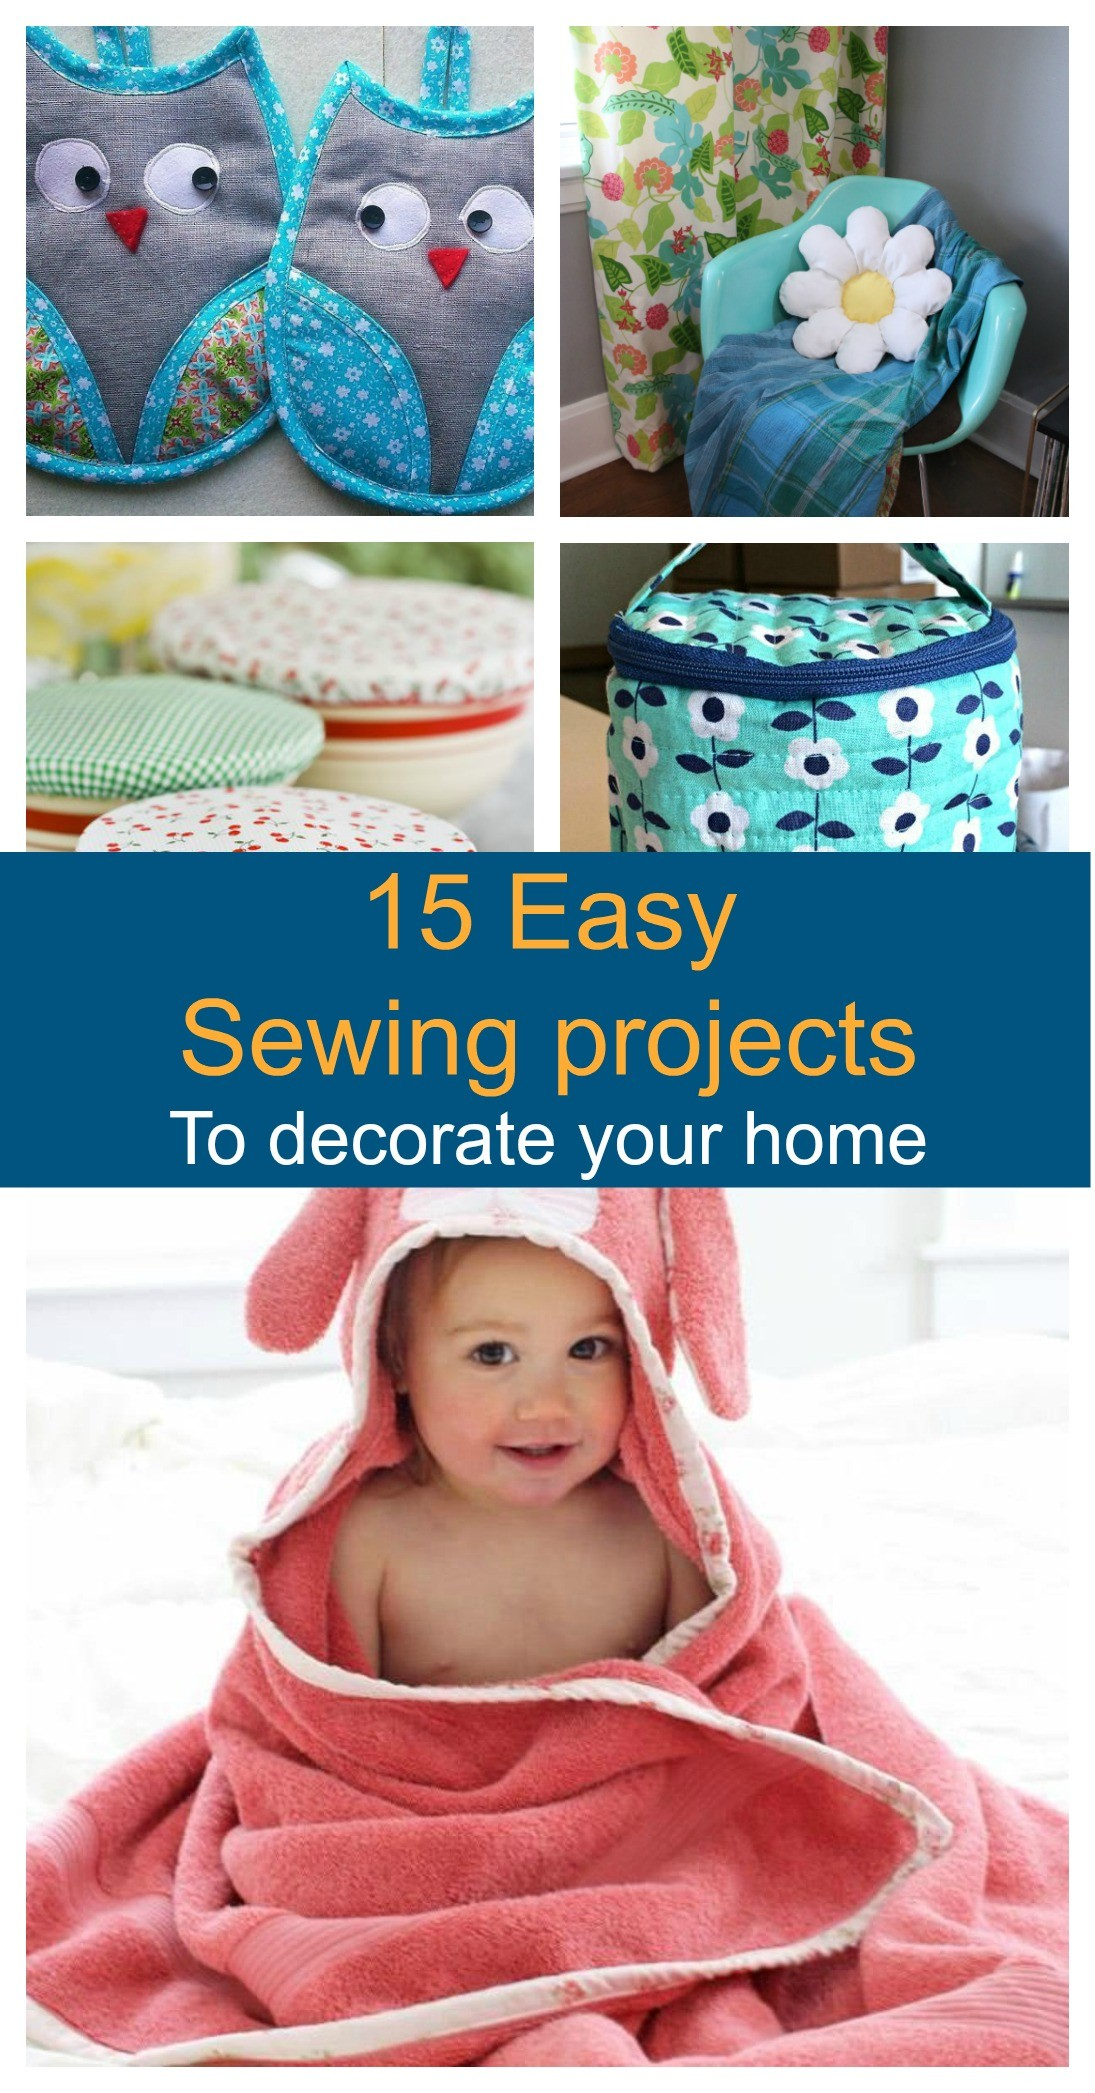 FREE PATTERN ALERT 15 Easy Sewing Projects For Home On 